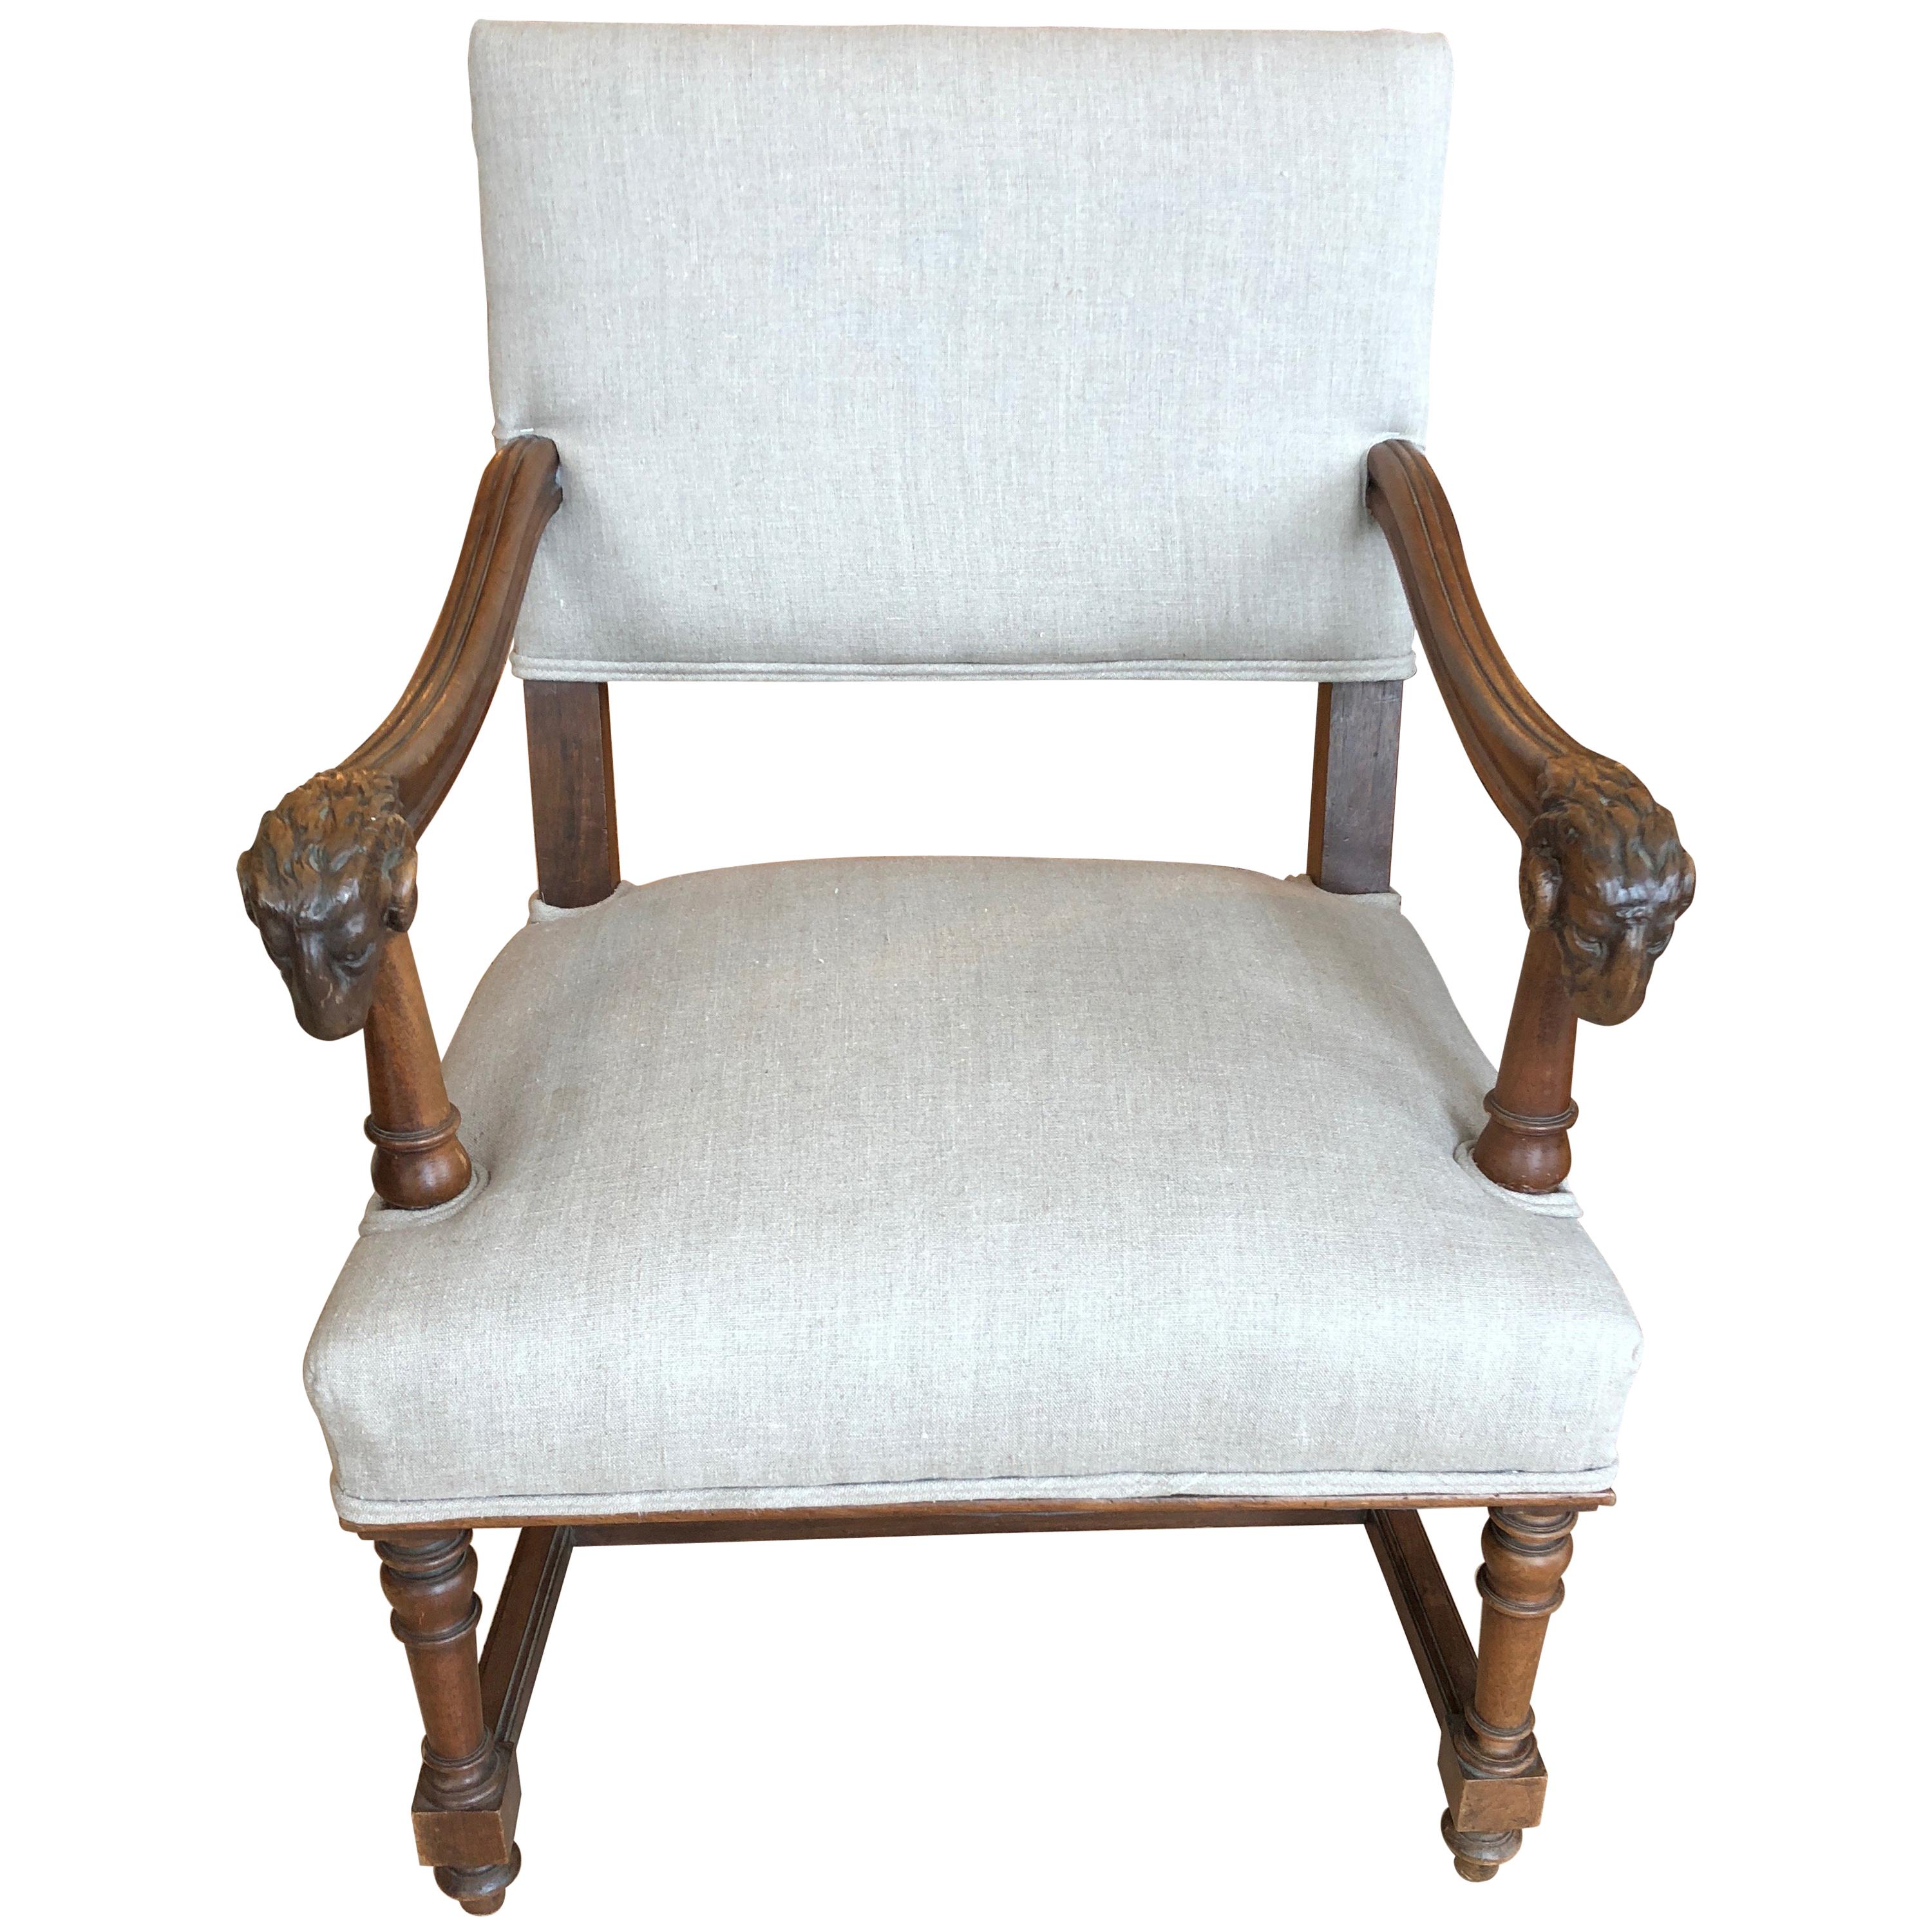 Handsome Carved Walnut and Linen Armchair with Ram's Heads